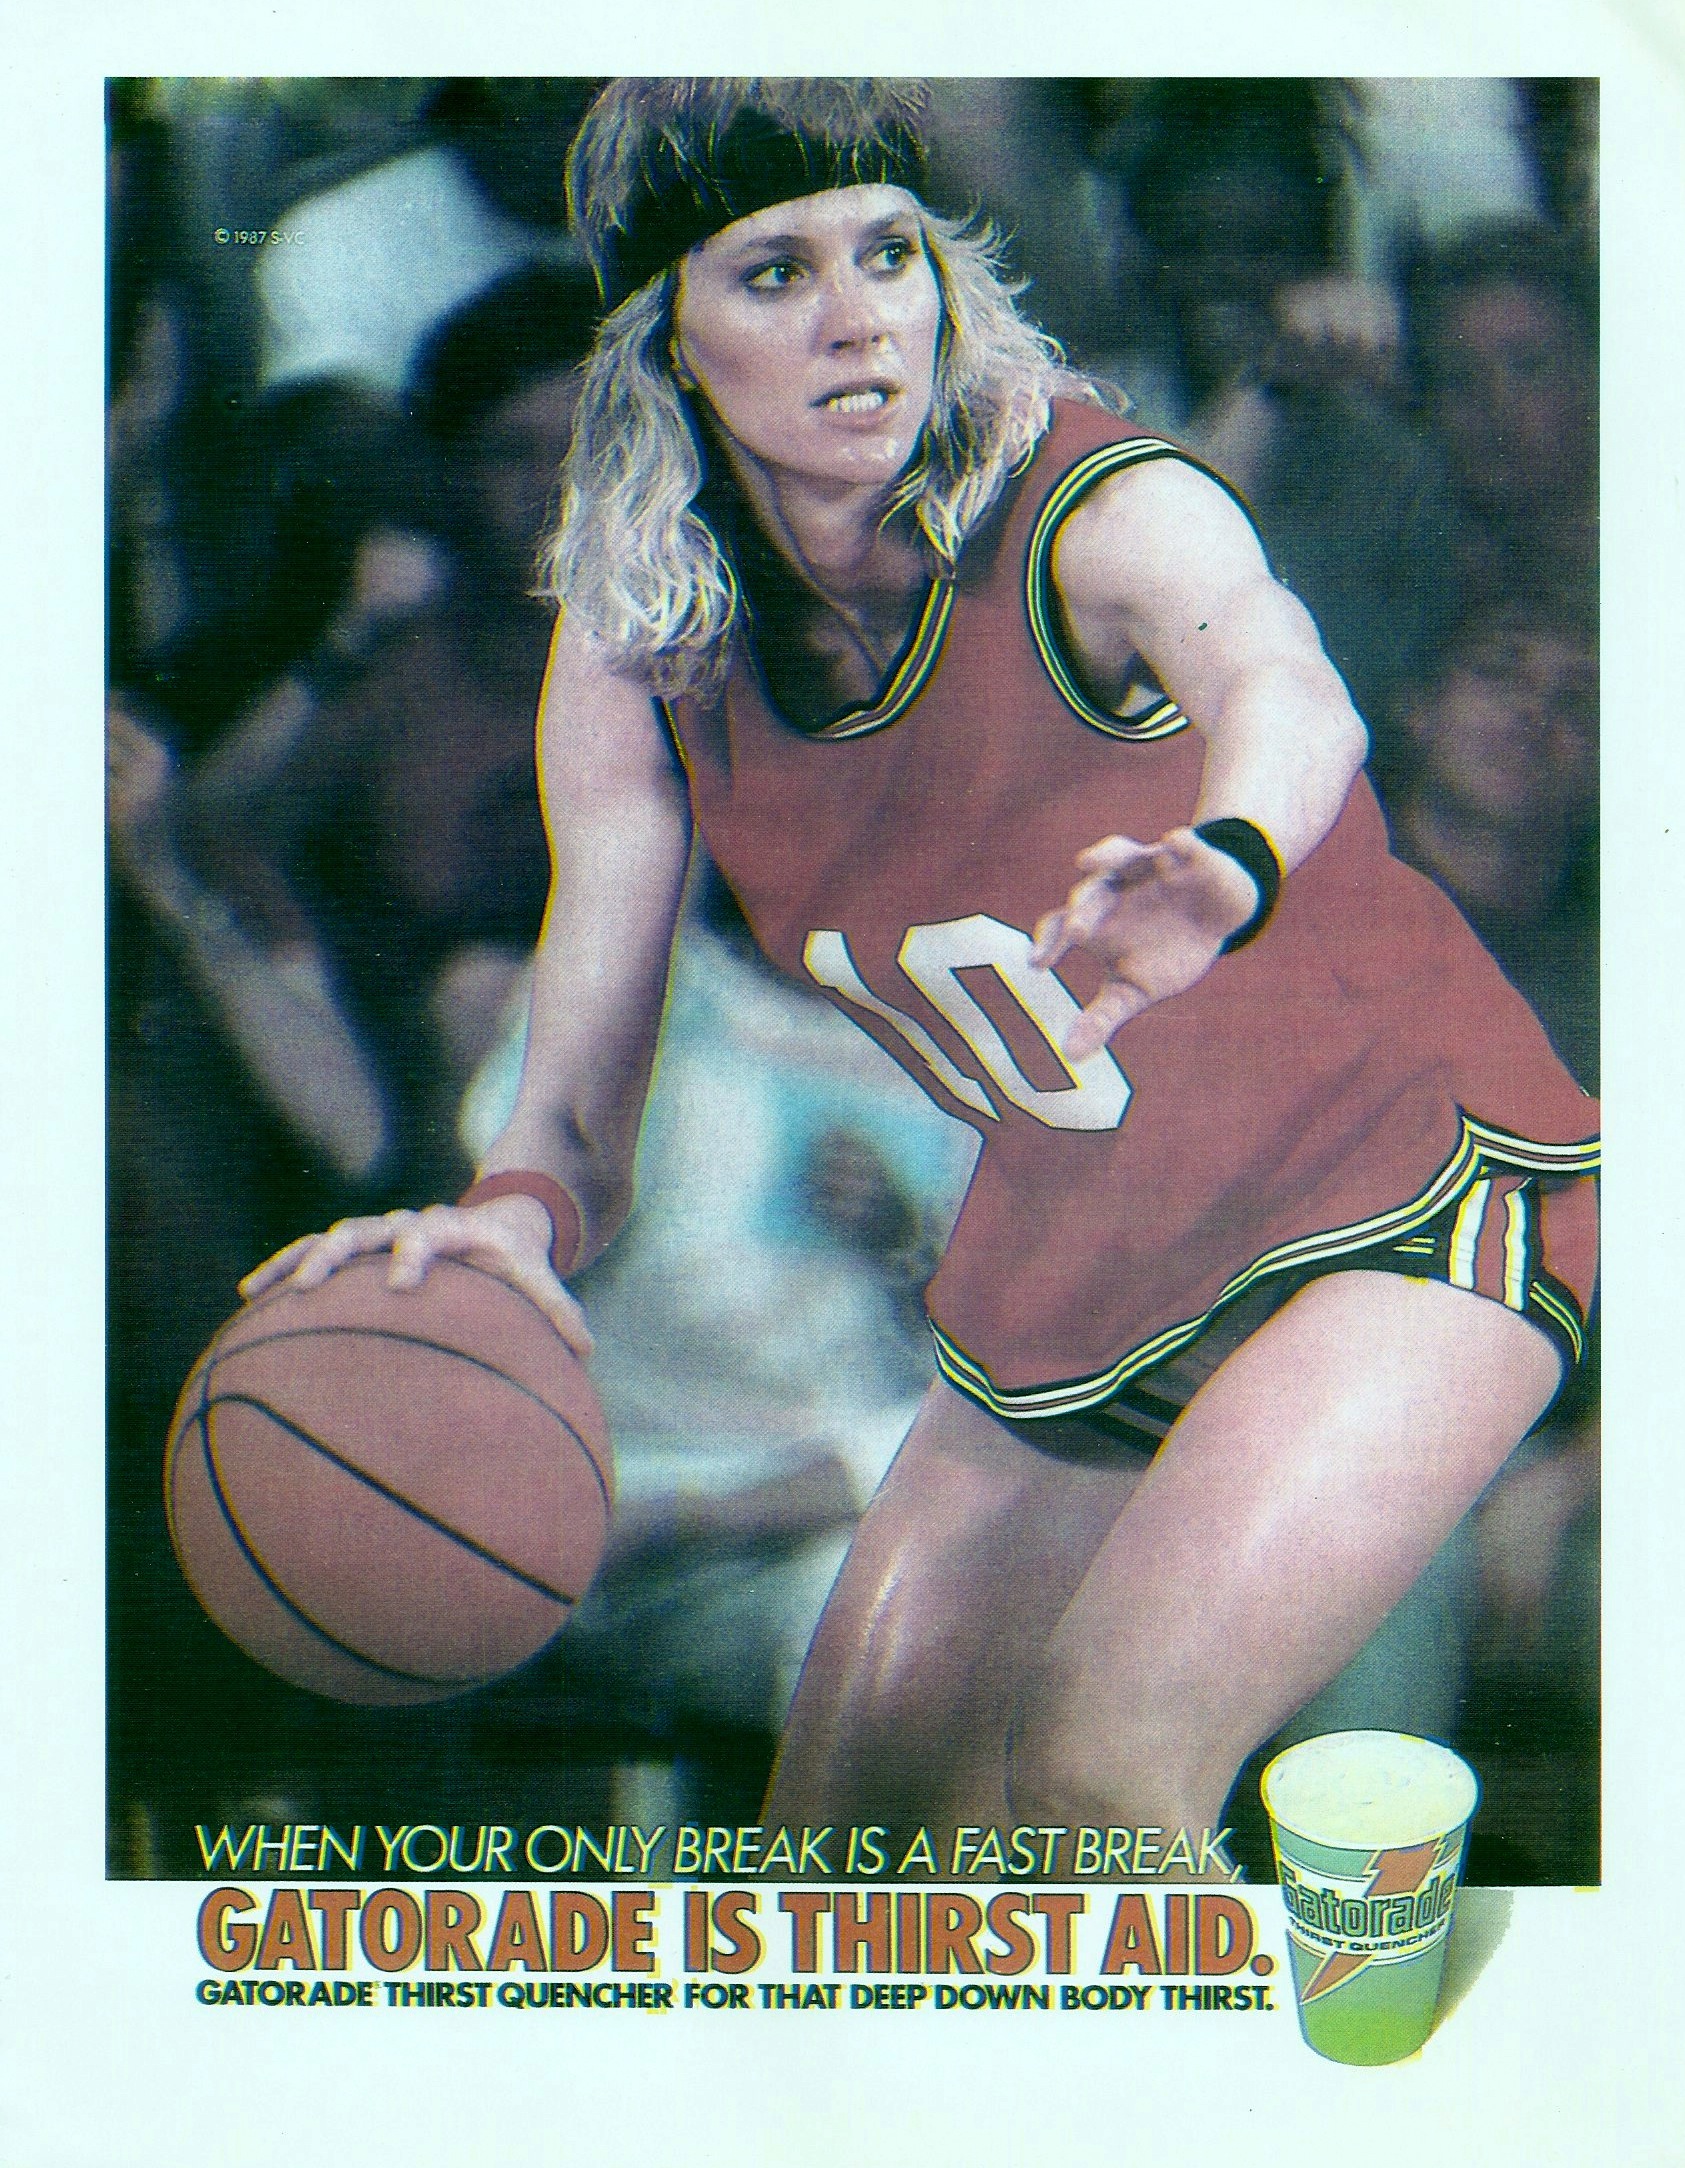 Gretchen Becker in a national ad for Gatorade.